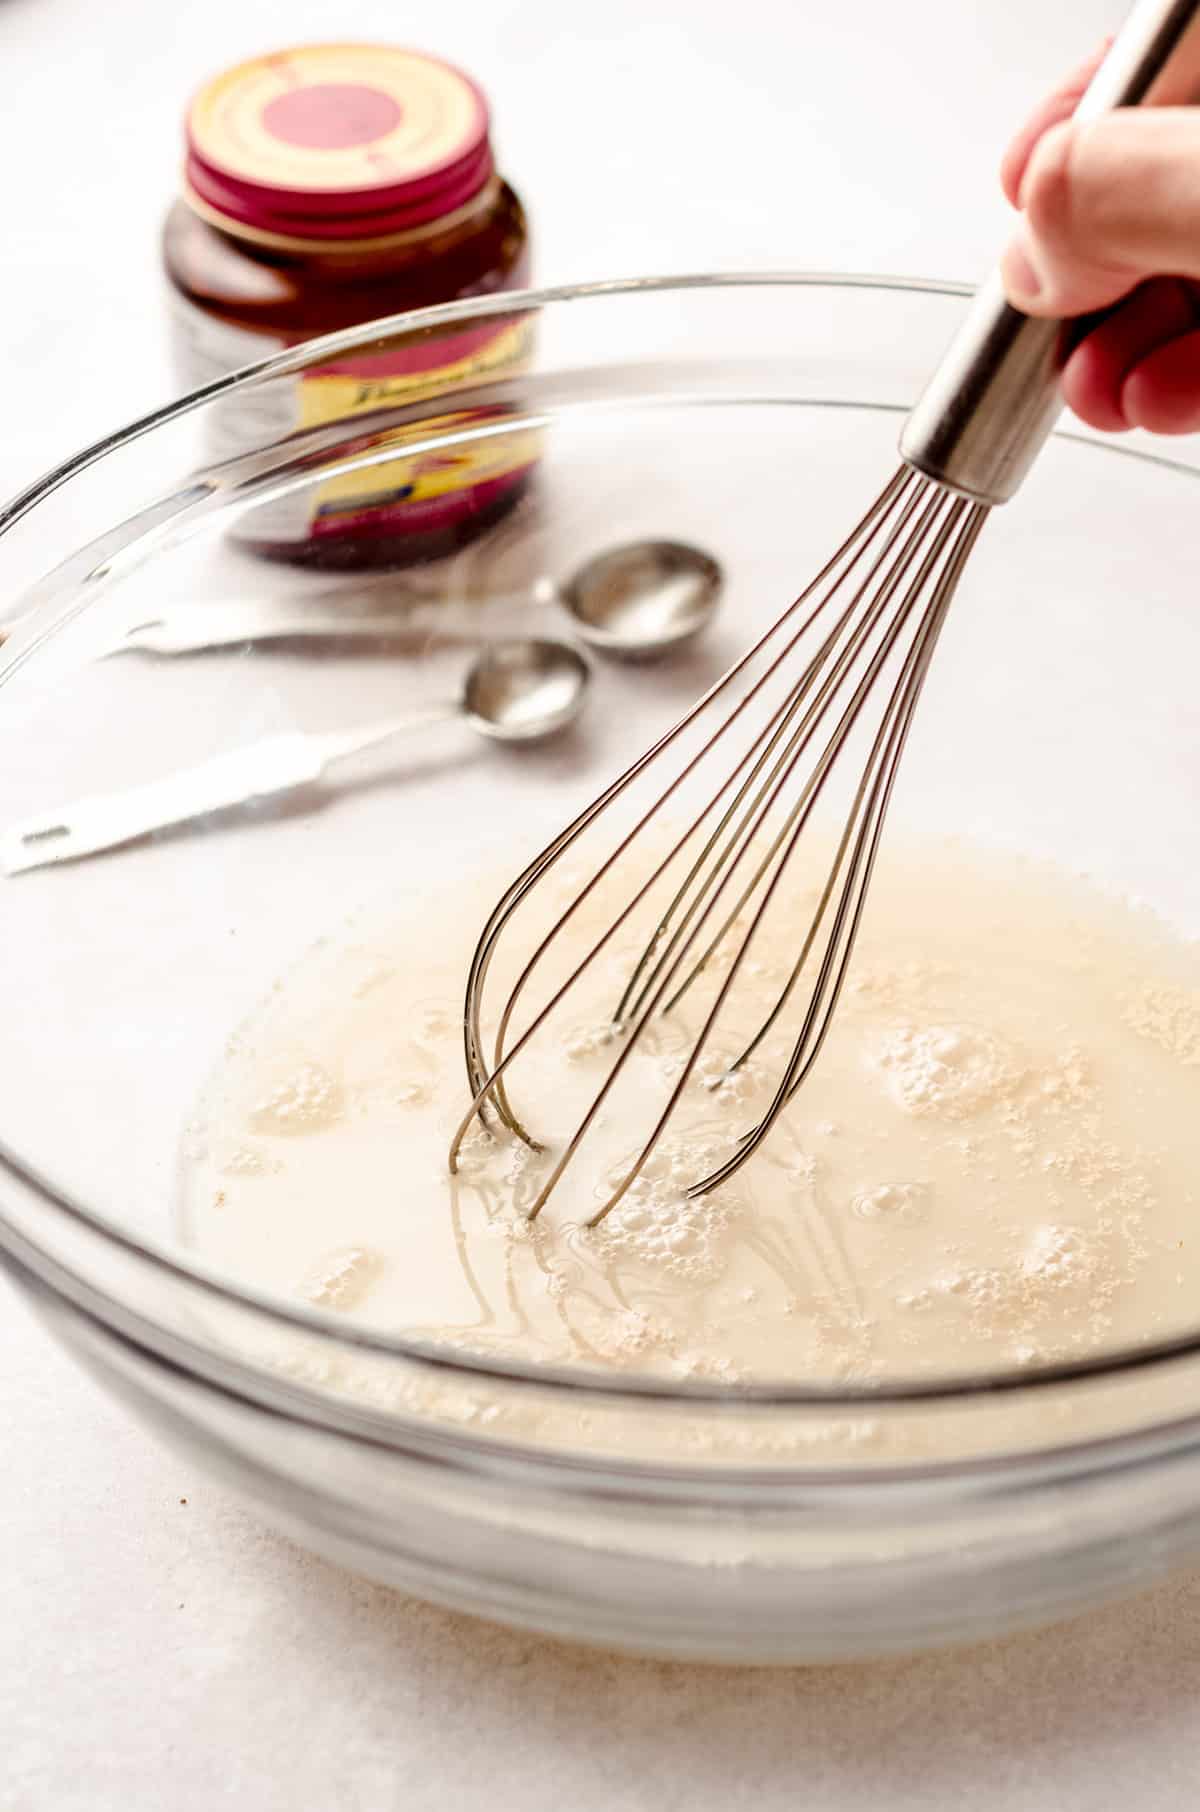 whisking together yeast, water, and sugar to make homemade pizza dough